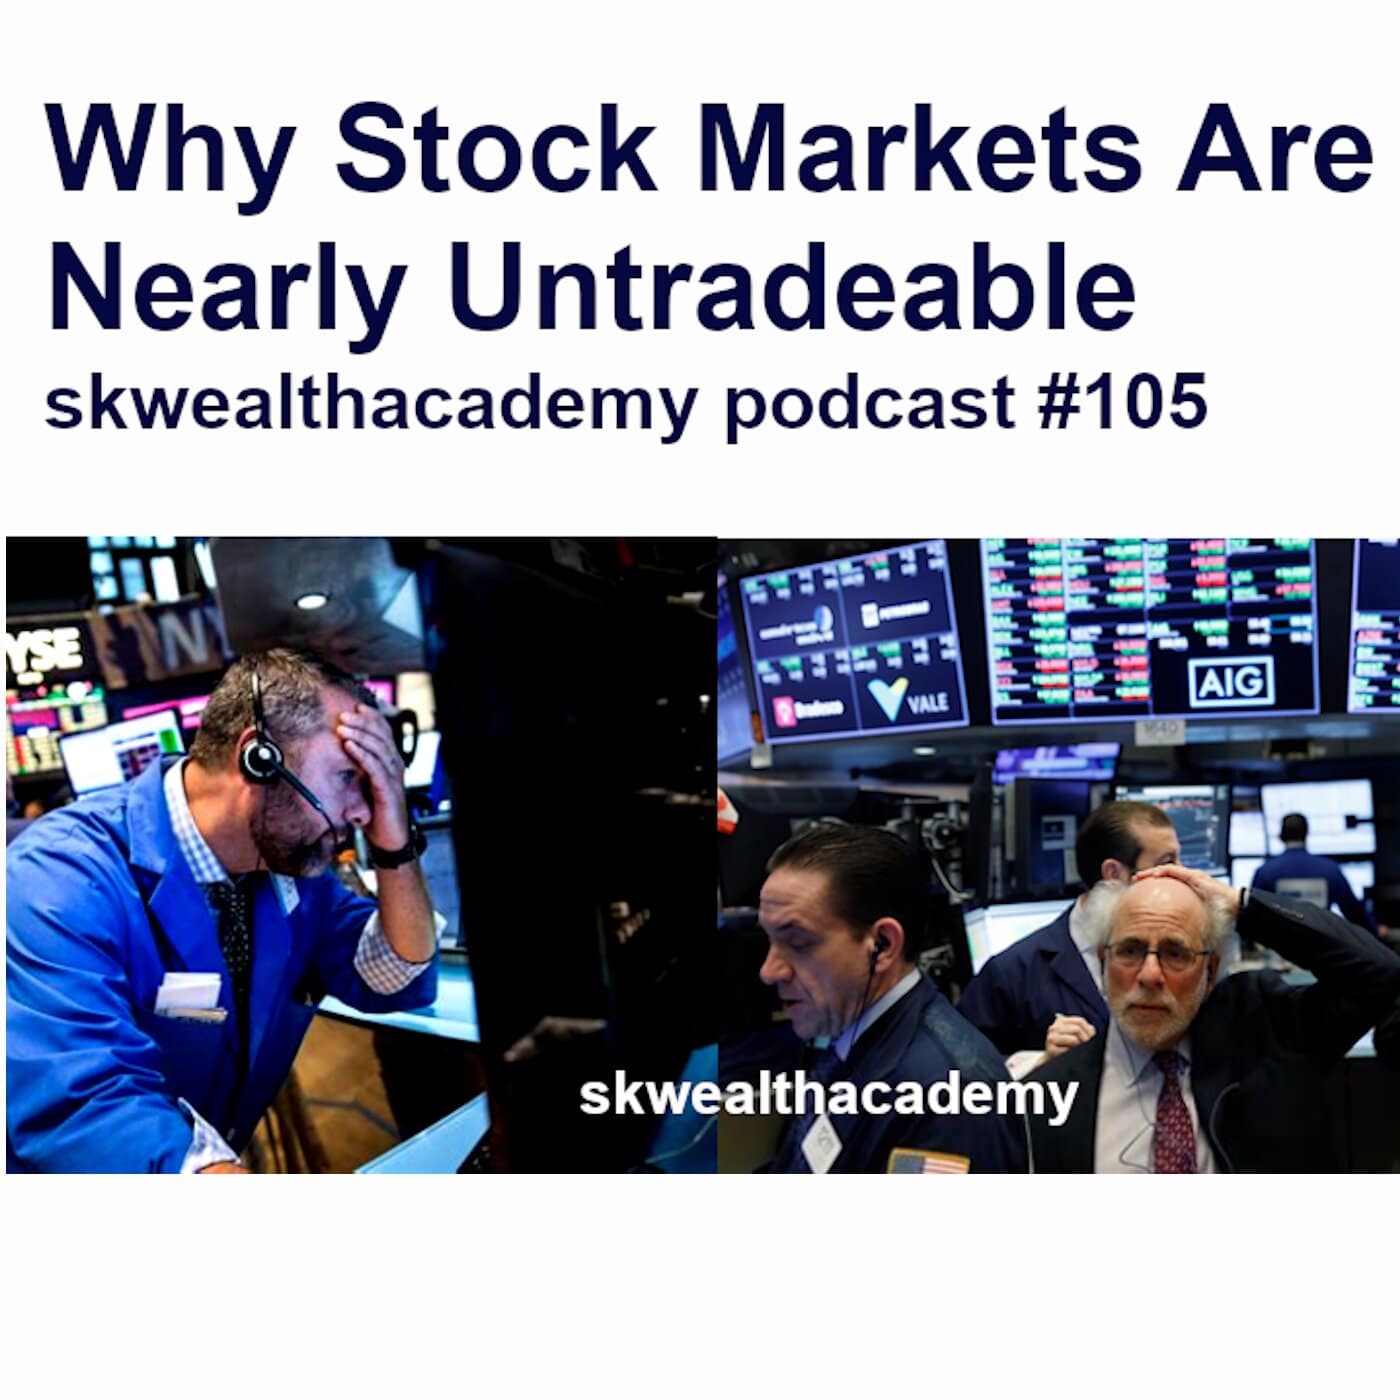 the untradeable nature of today's stock markets